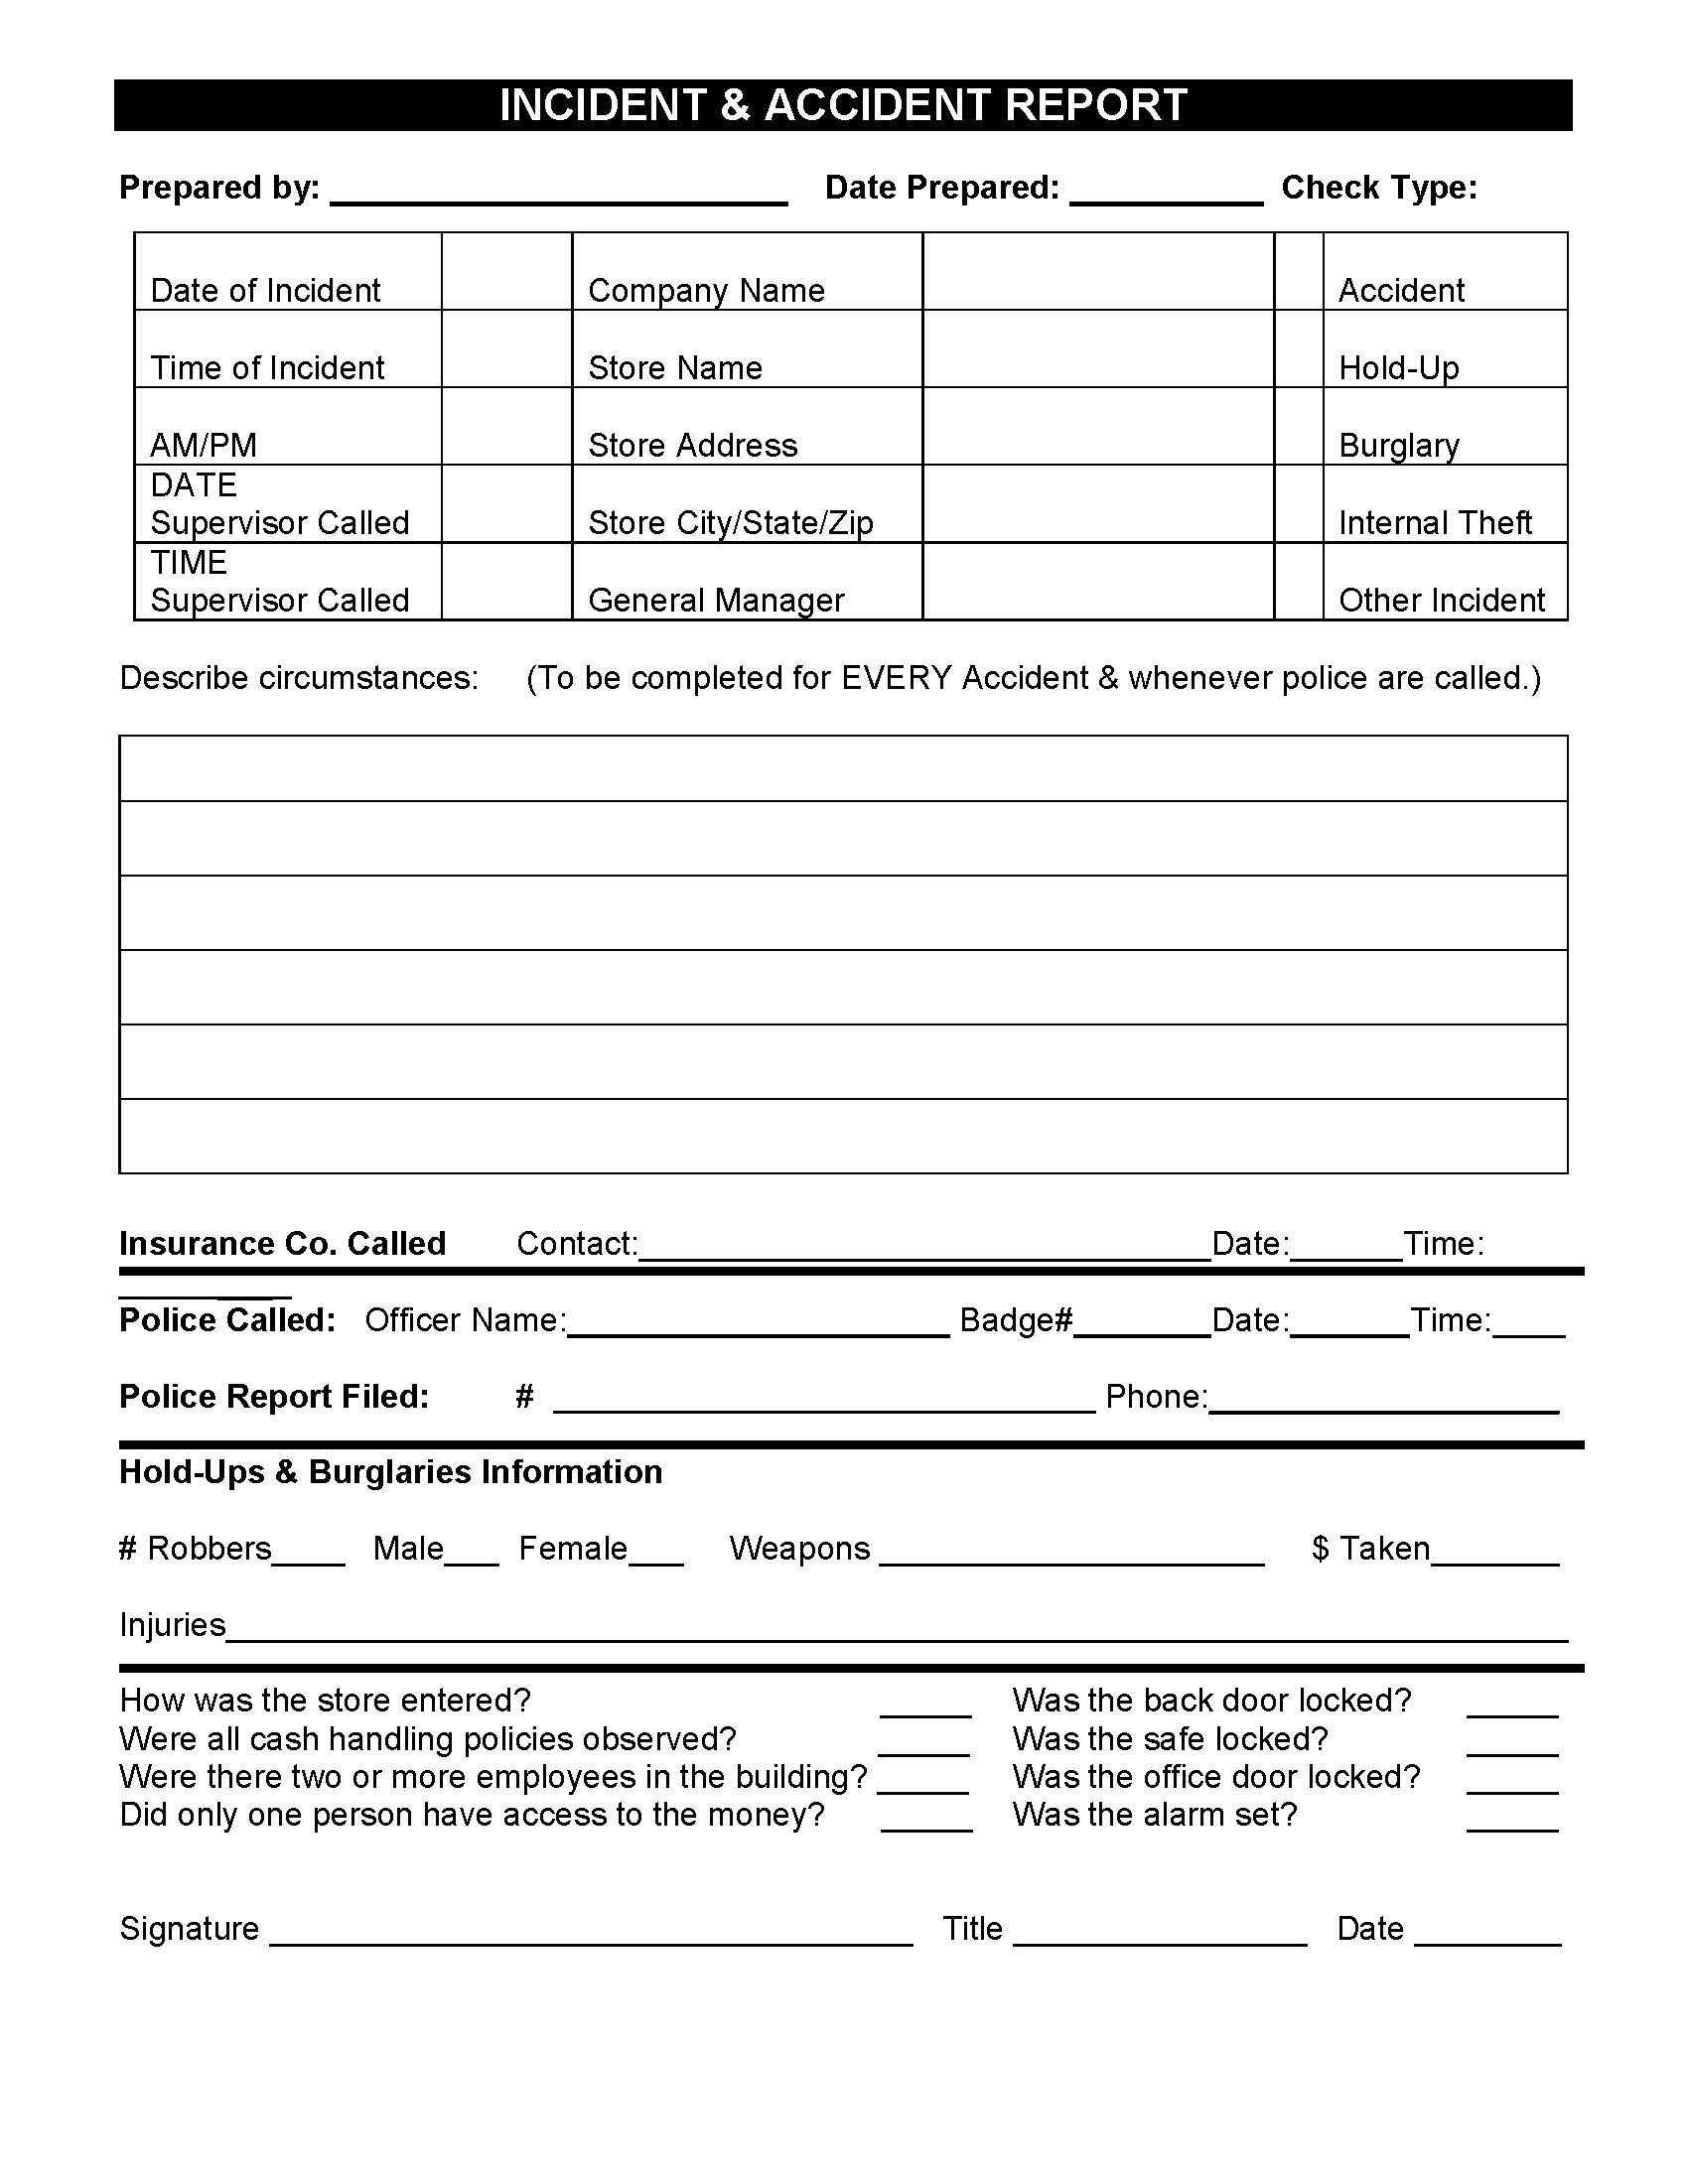 Restaurant Incident Accident Report. | Restaurant Resource Within Customer Incident Report Form Template